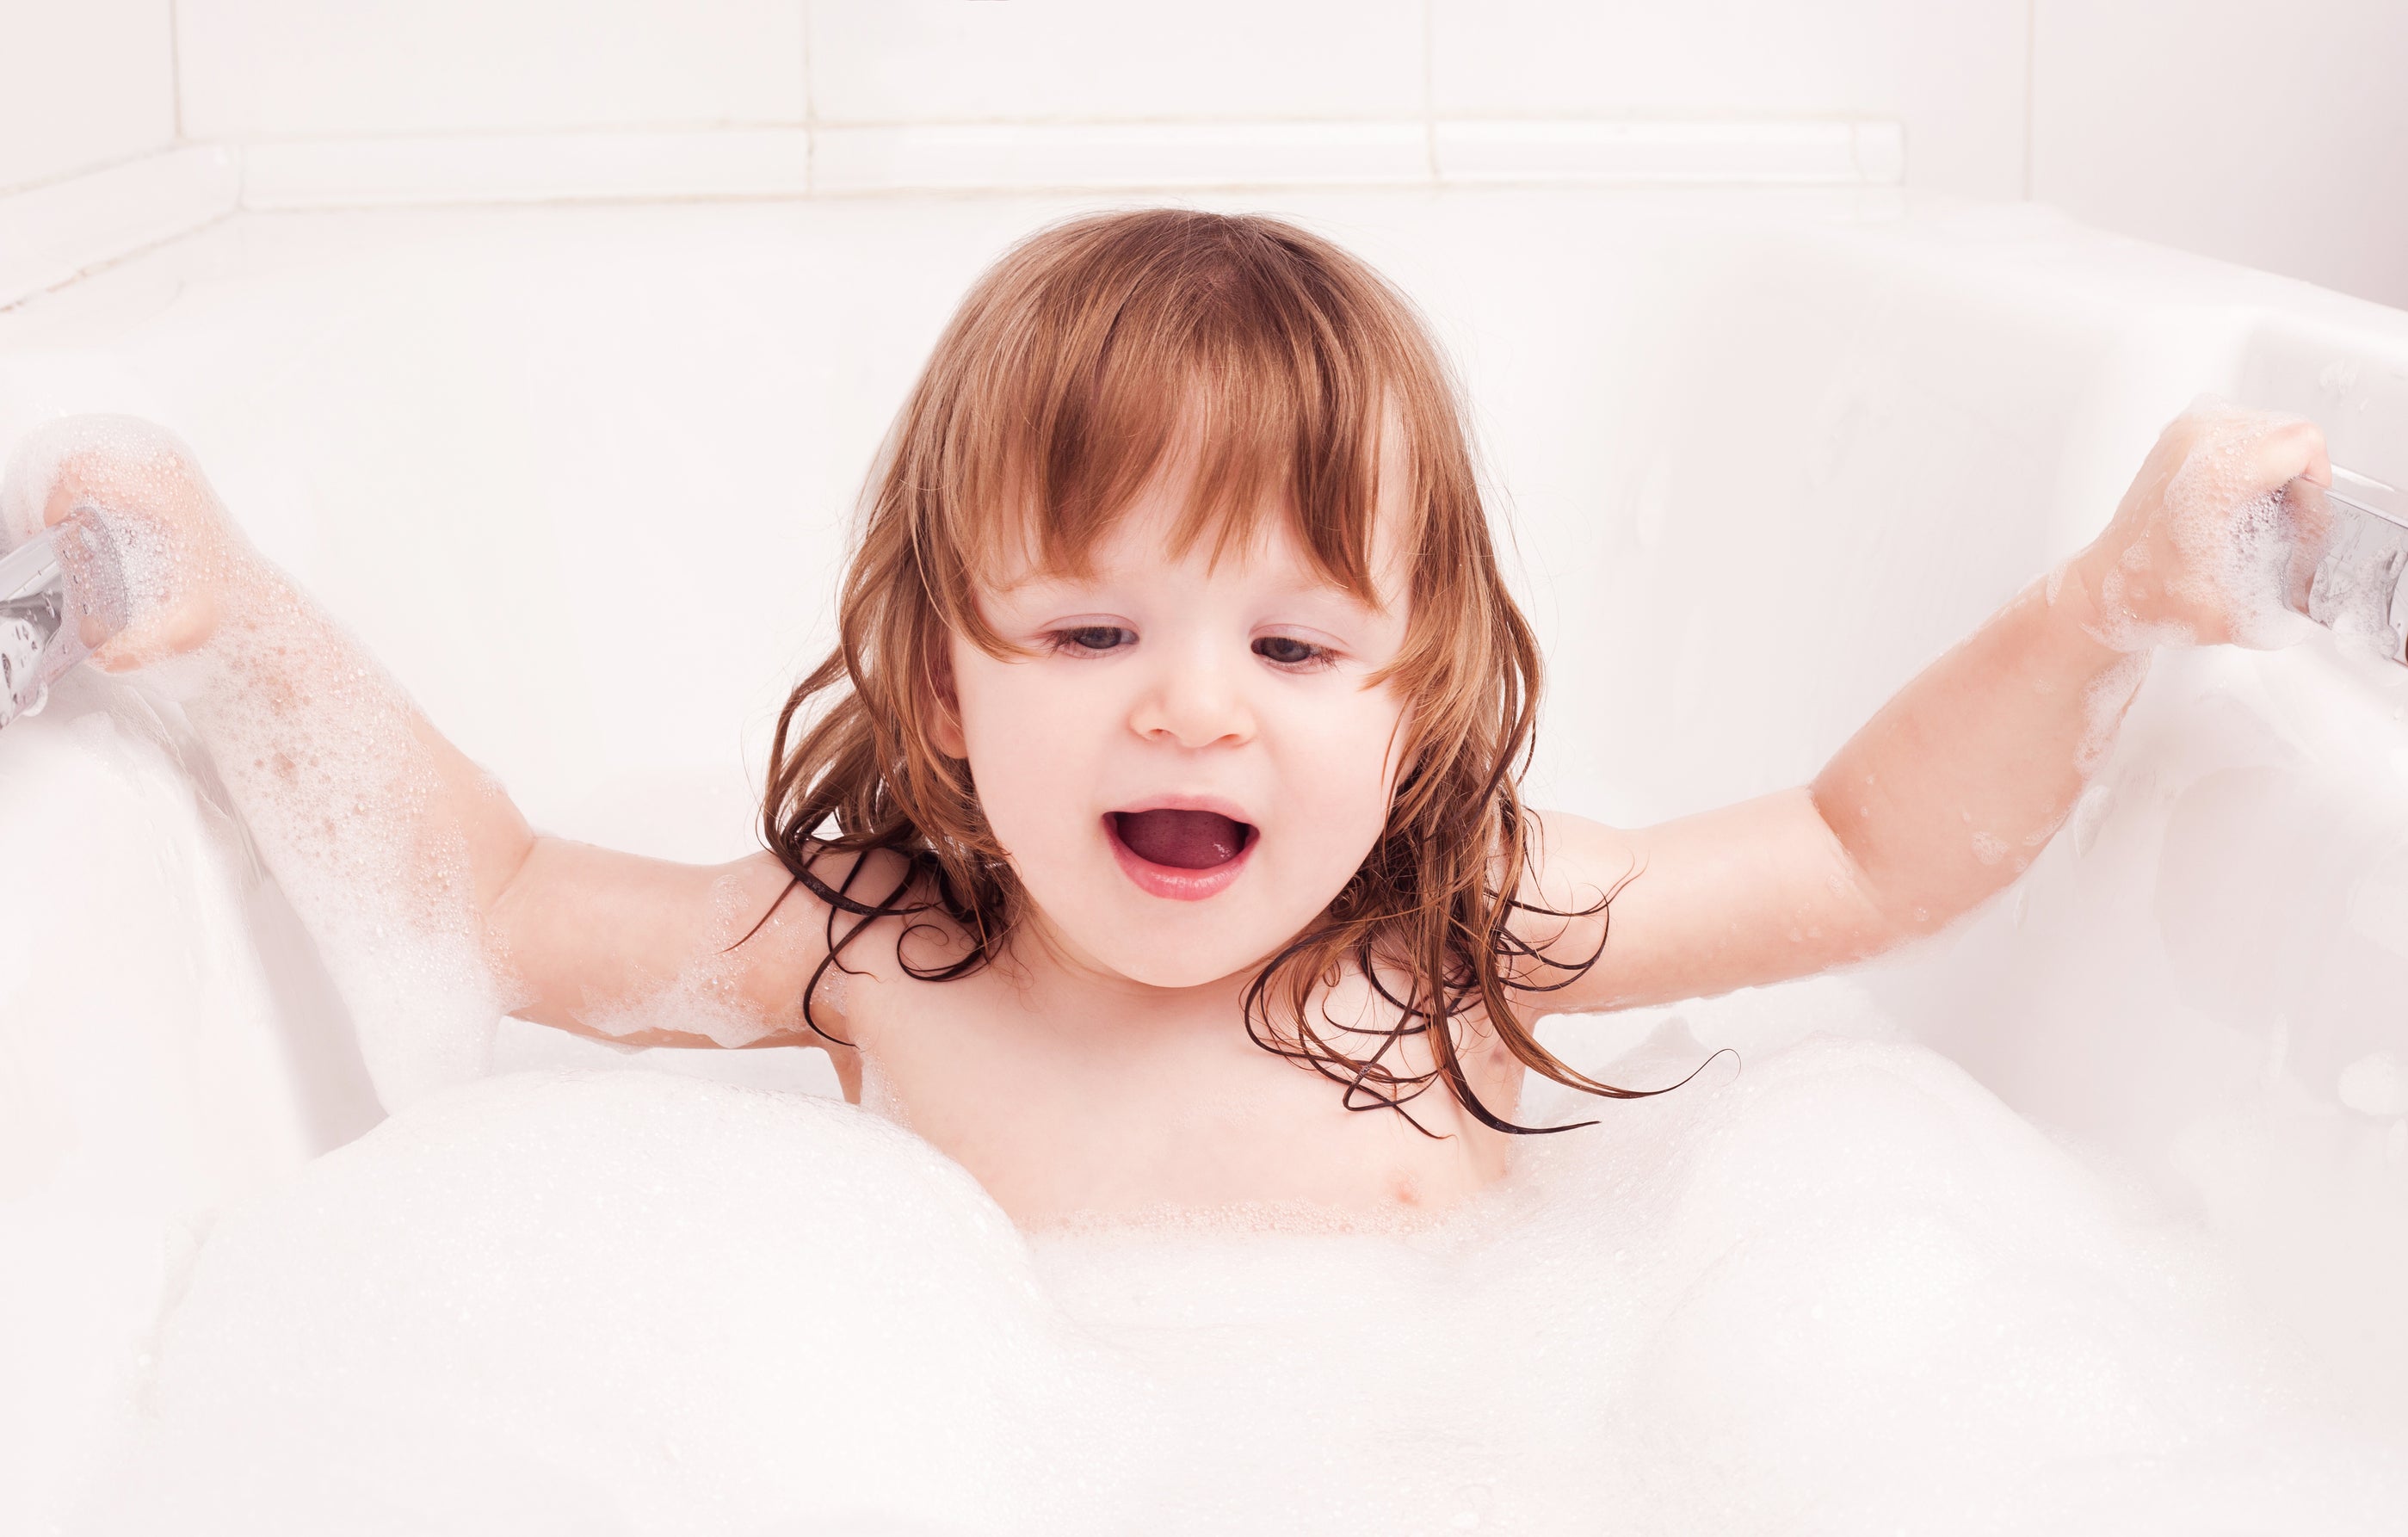 5 of My Favorite Bath Time Essentials for Kids